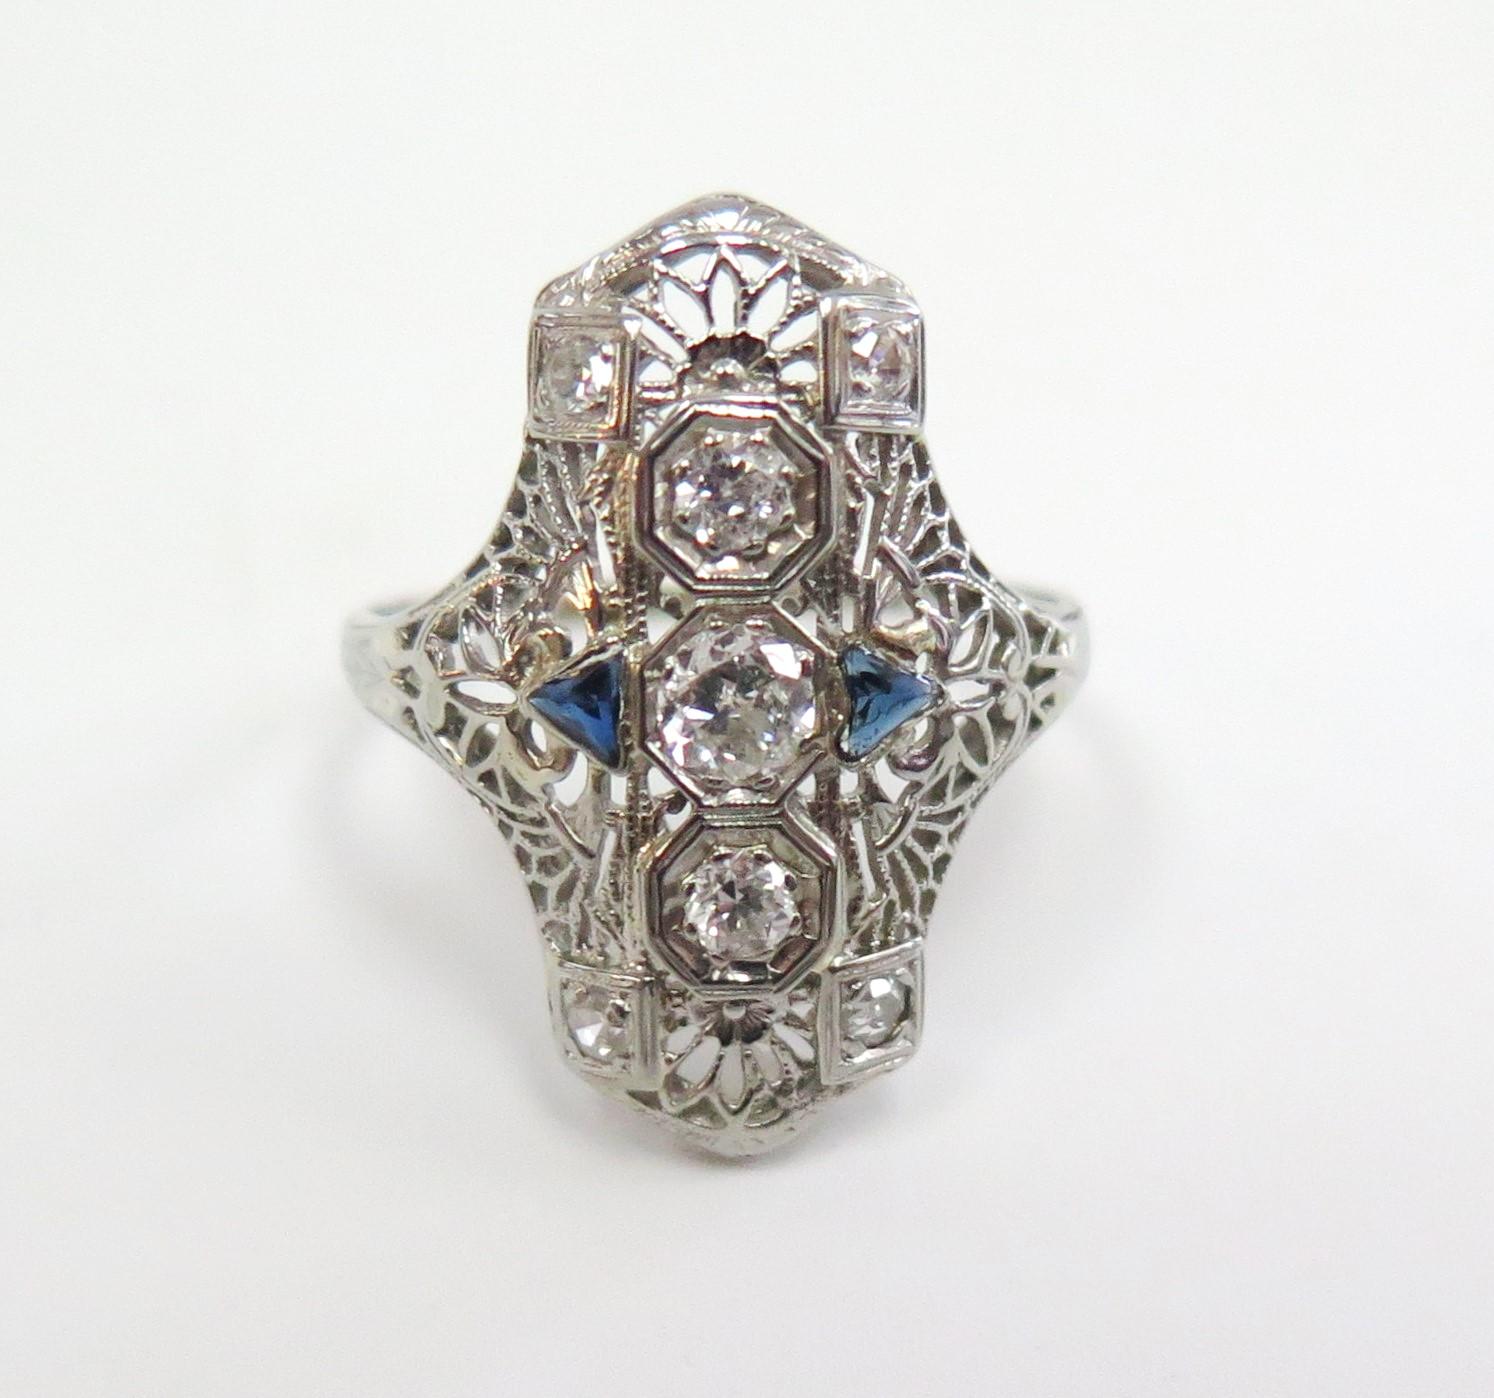 Three round Old European cut diamonds sparkle in a line with a Single Cut Diamond in each corner,  while genuine triangle-cut sapphires accent this detailed Art Deco filigree dinner ring. 

Total Diamond Weight: 0.42 Carat, Color: G-H, Clarity: